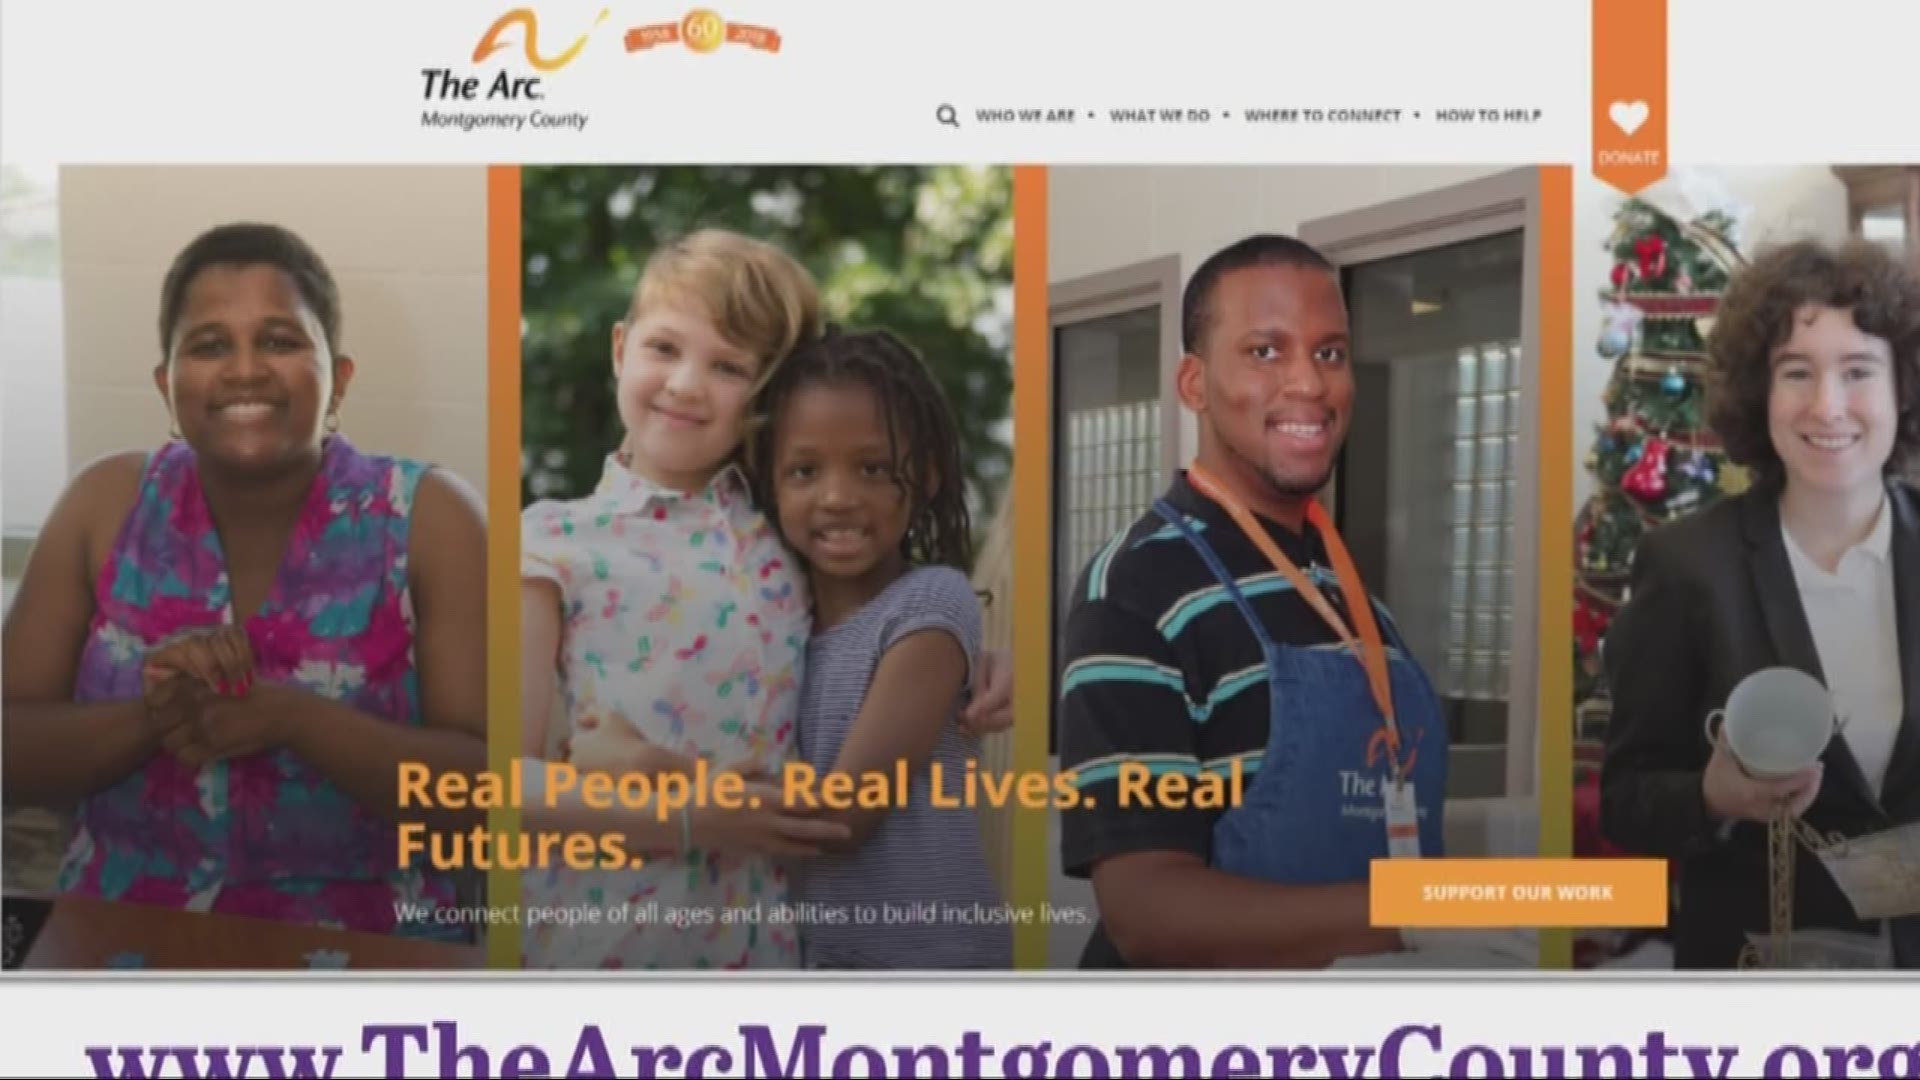 A major Montgomery County non-profit appears to be in financial trouble. The Arc provides services to people with special needs including children and seniors.